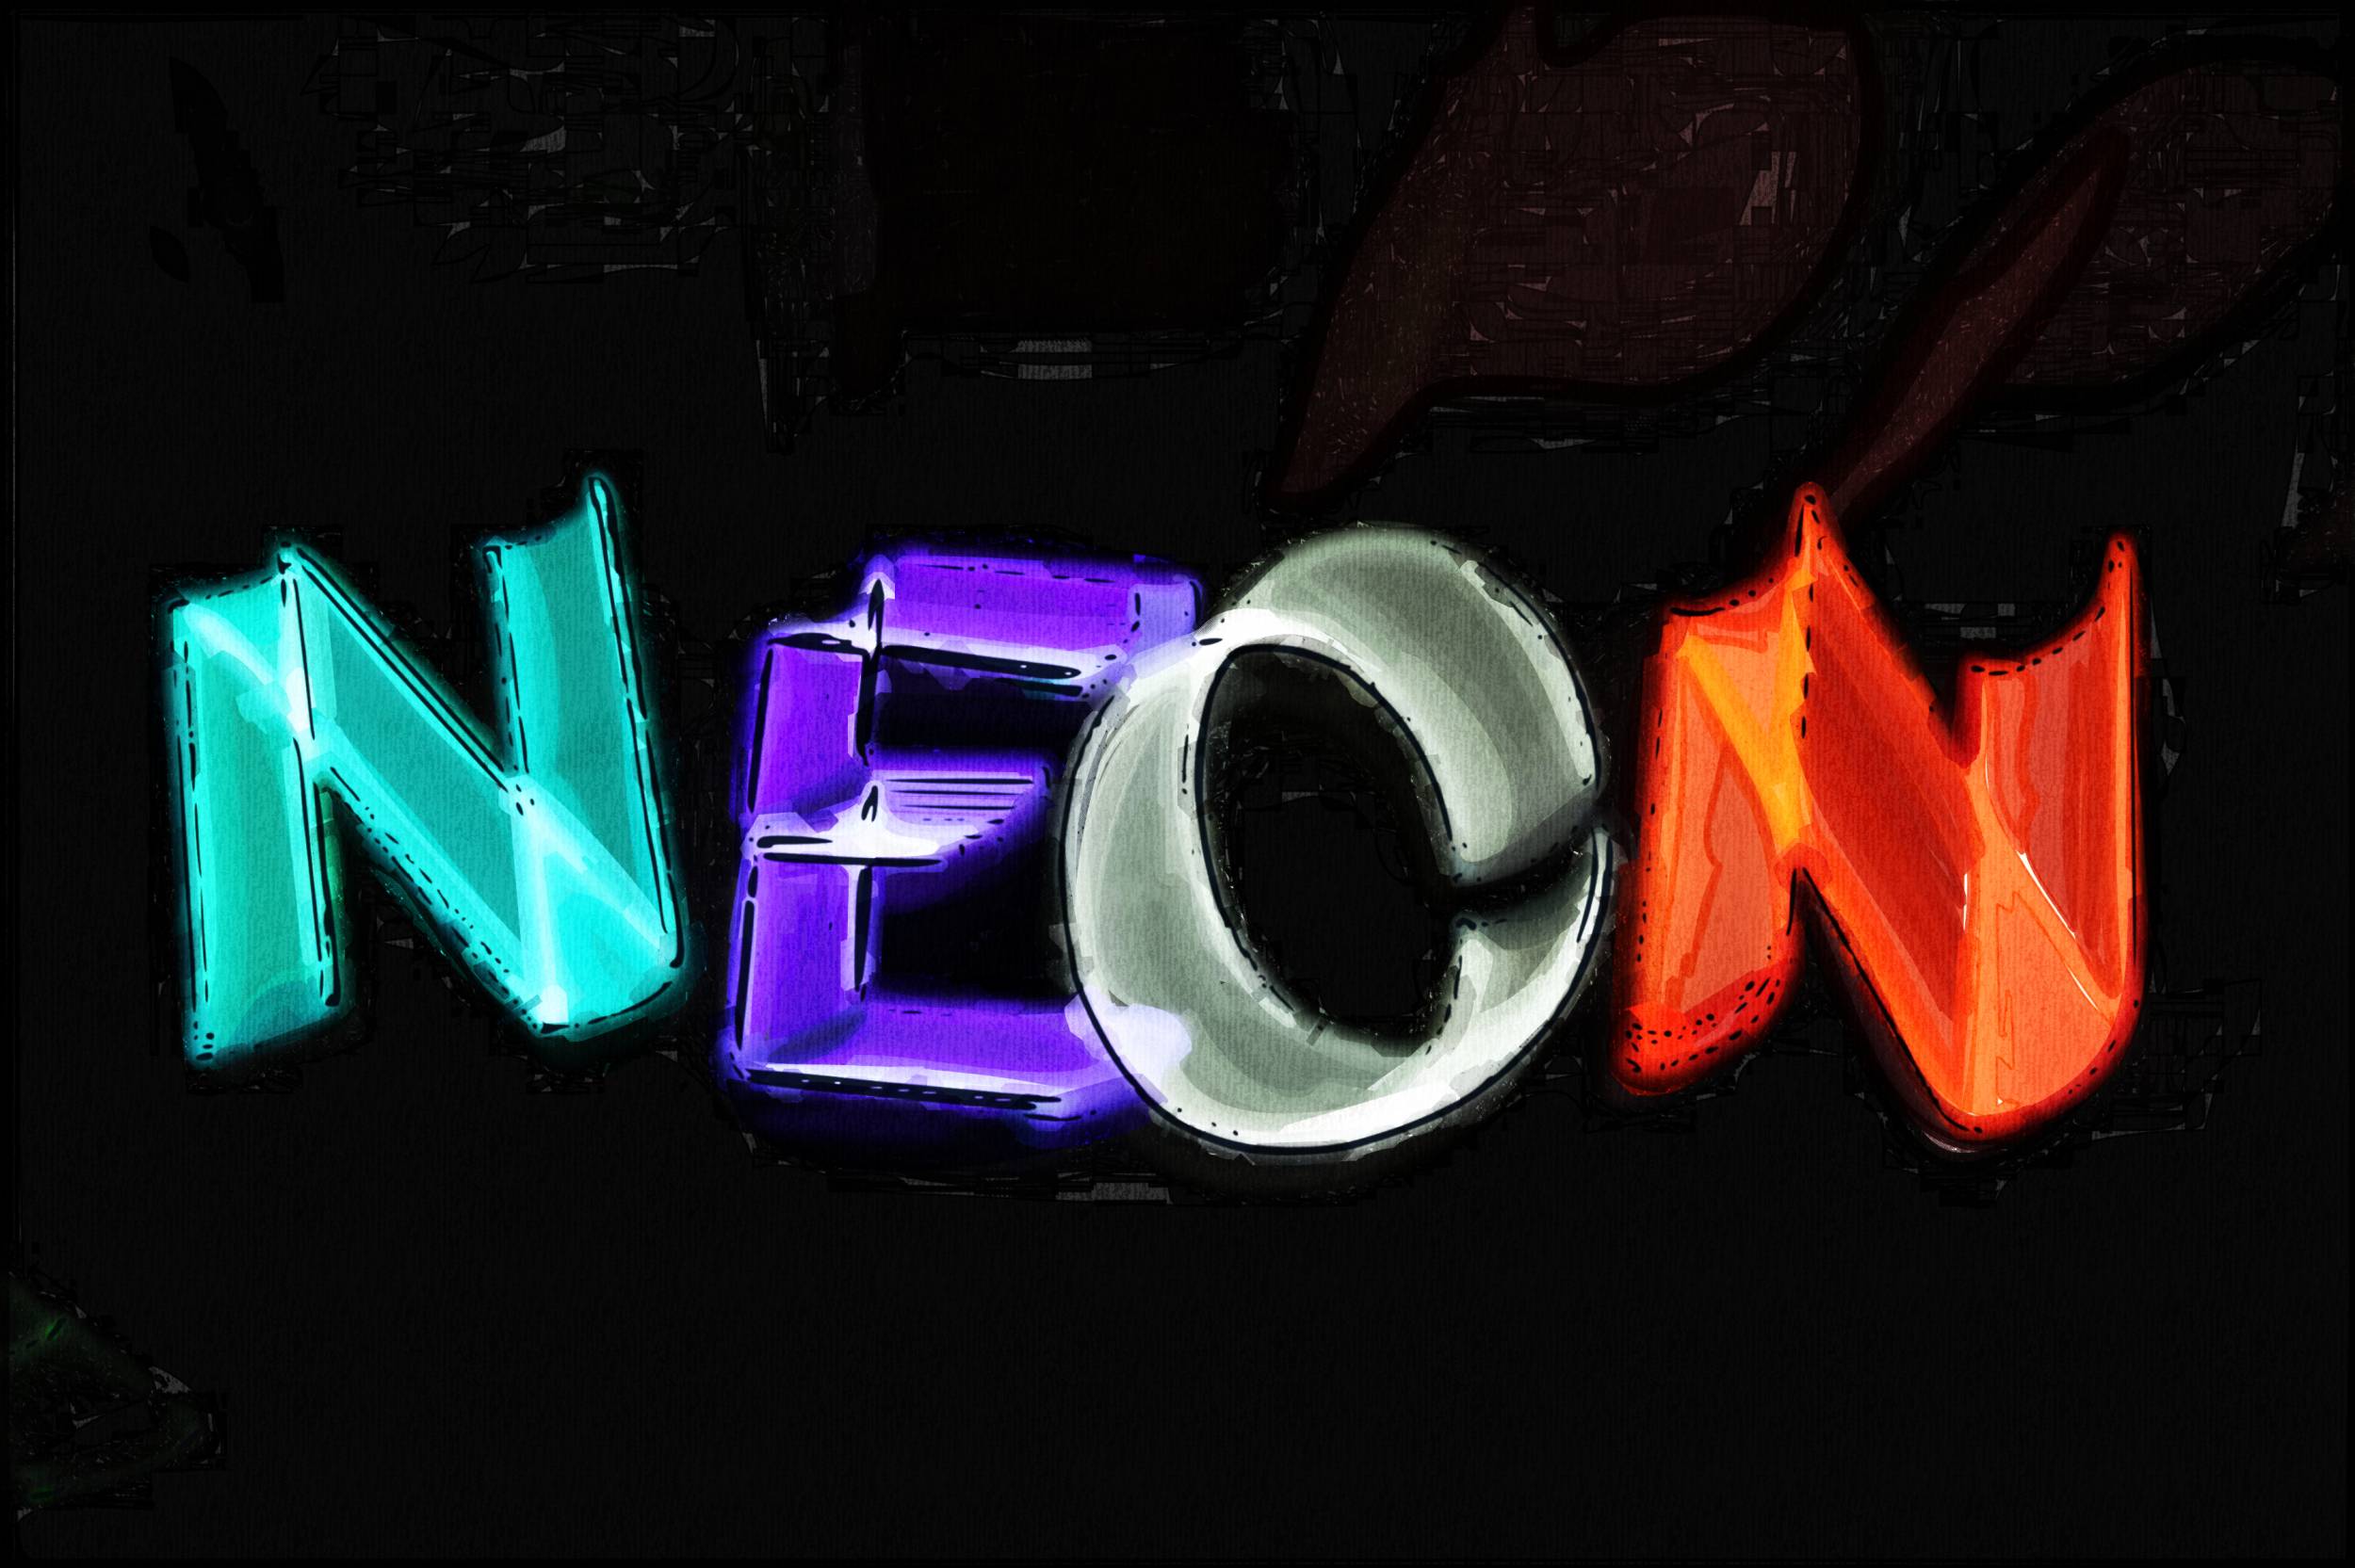 Neon Wallpaper ANZ46 for PC & Mac, Laptop, Tablet, Mobile Phone